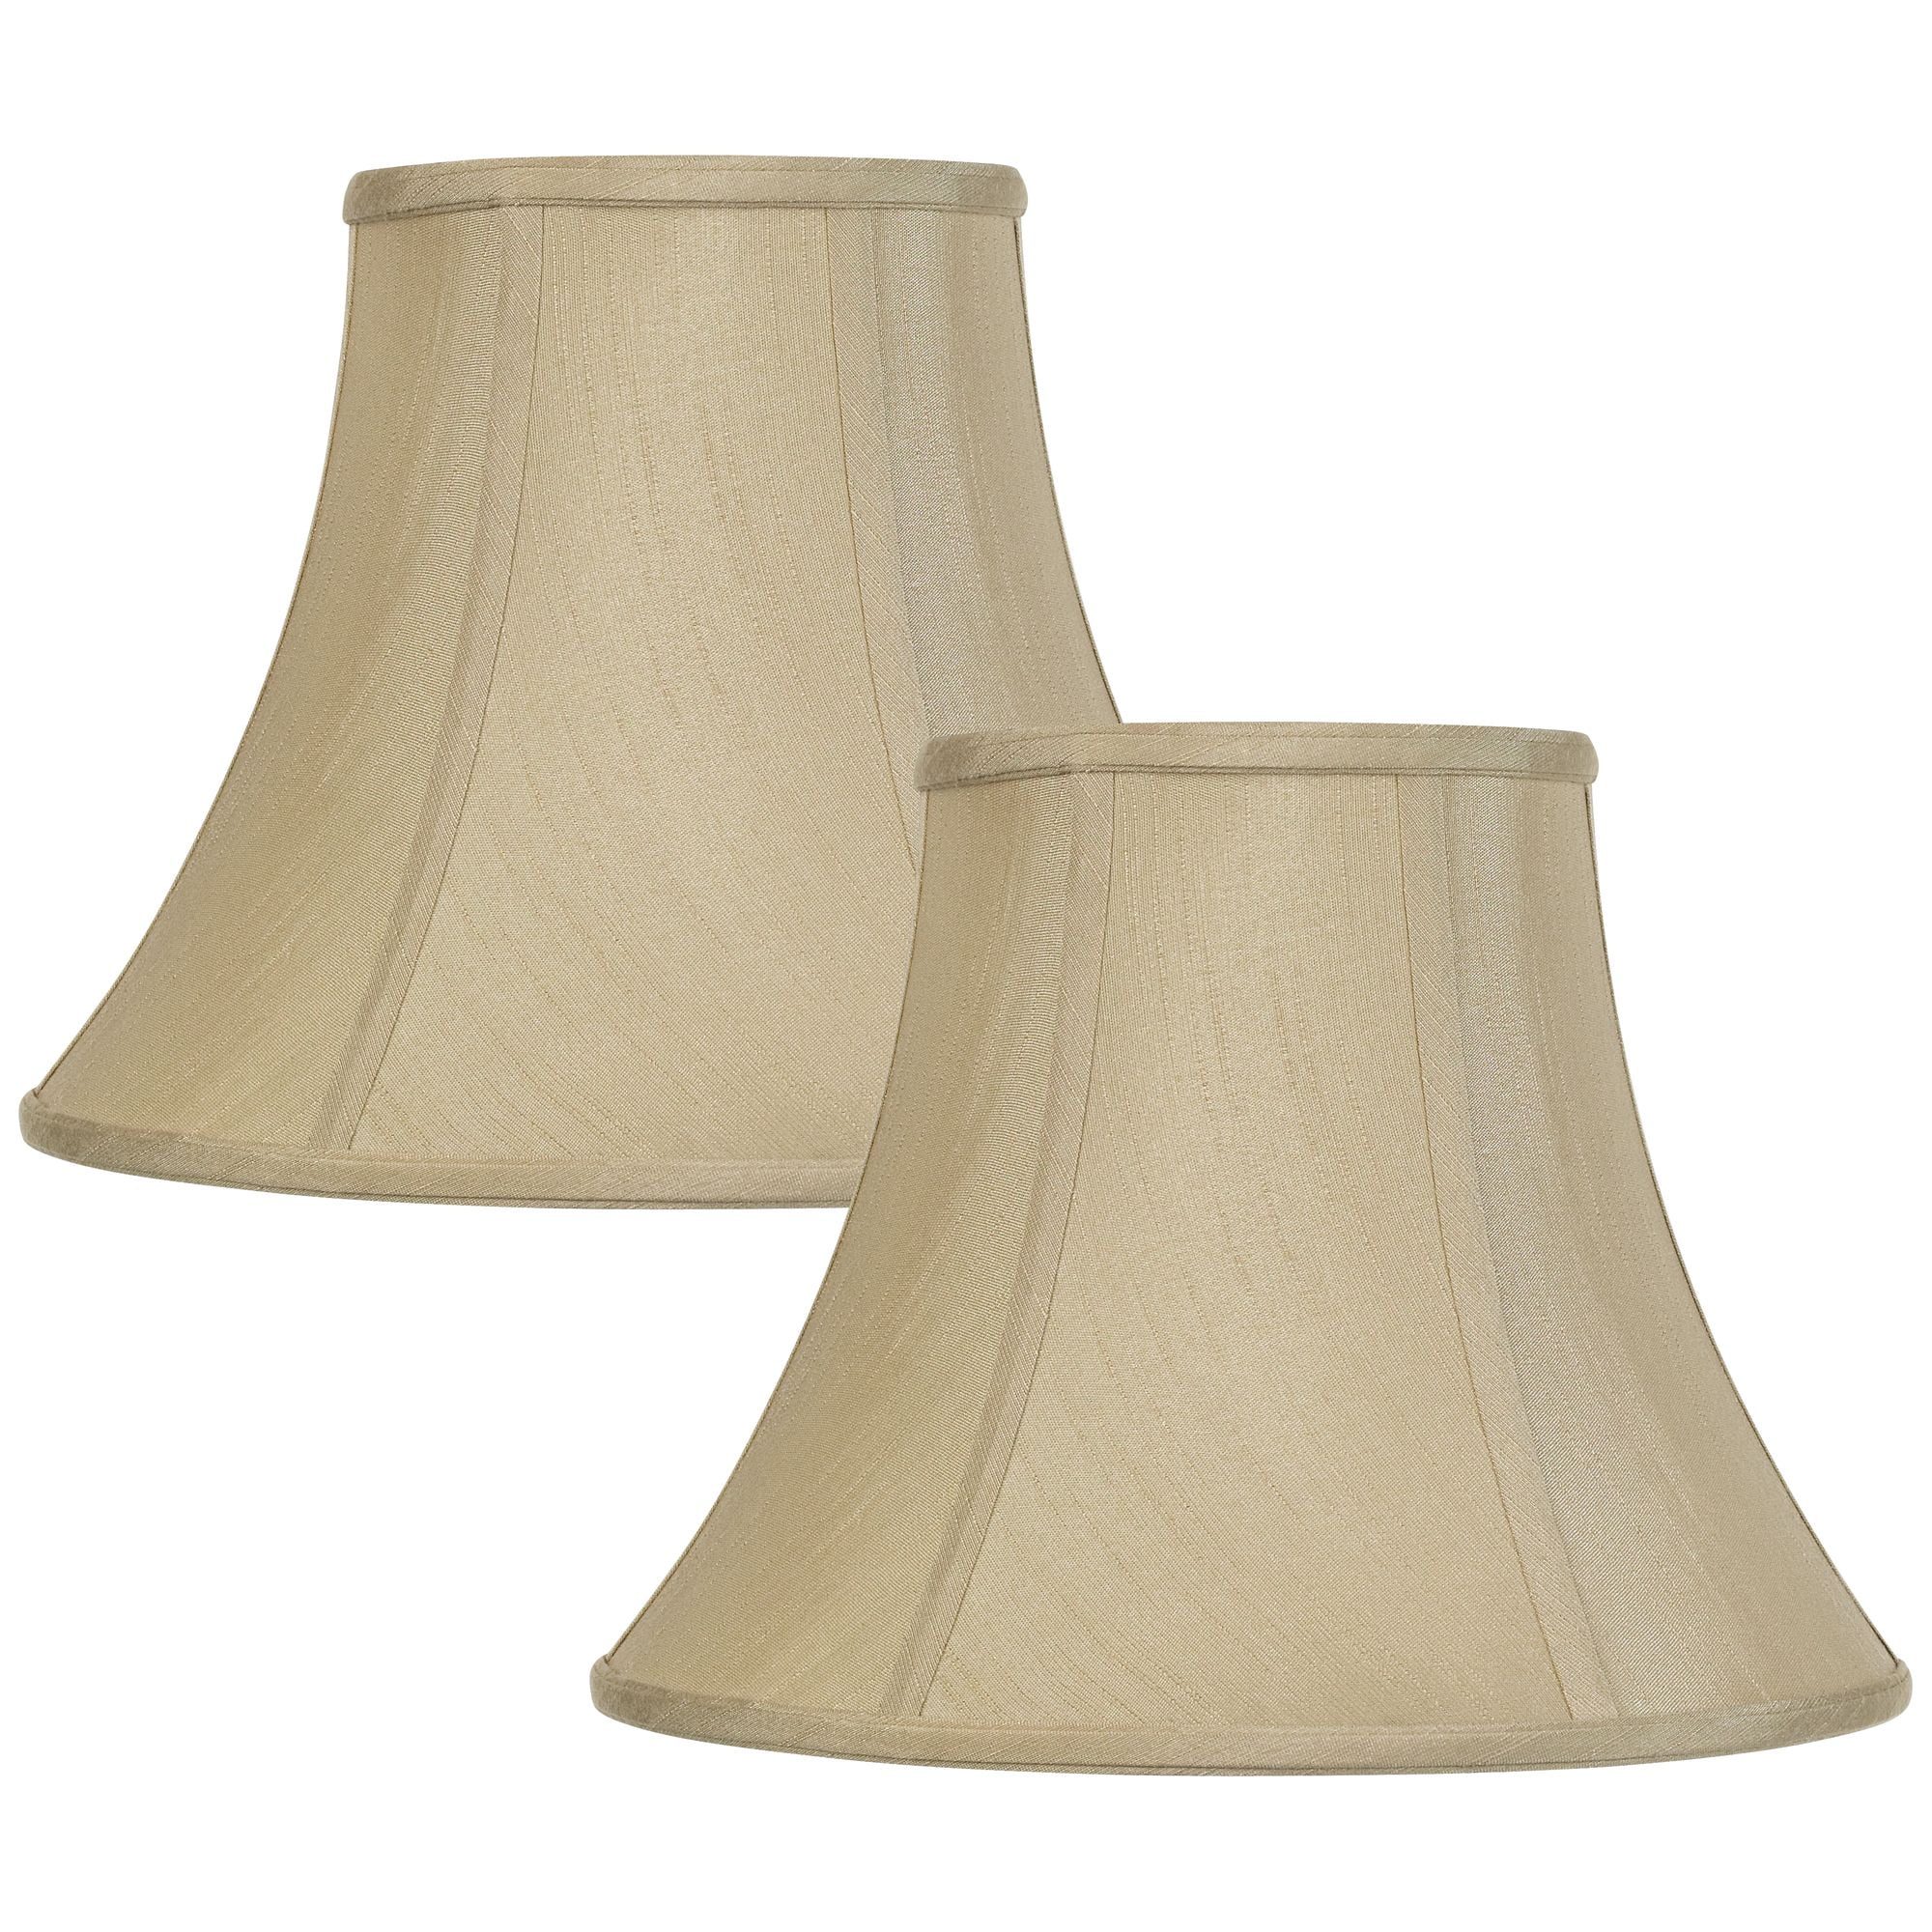 Spider Set of 2 Imperial Shade Taupe Bell Shades 7x14x11 